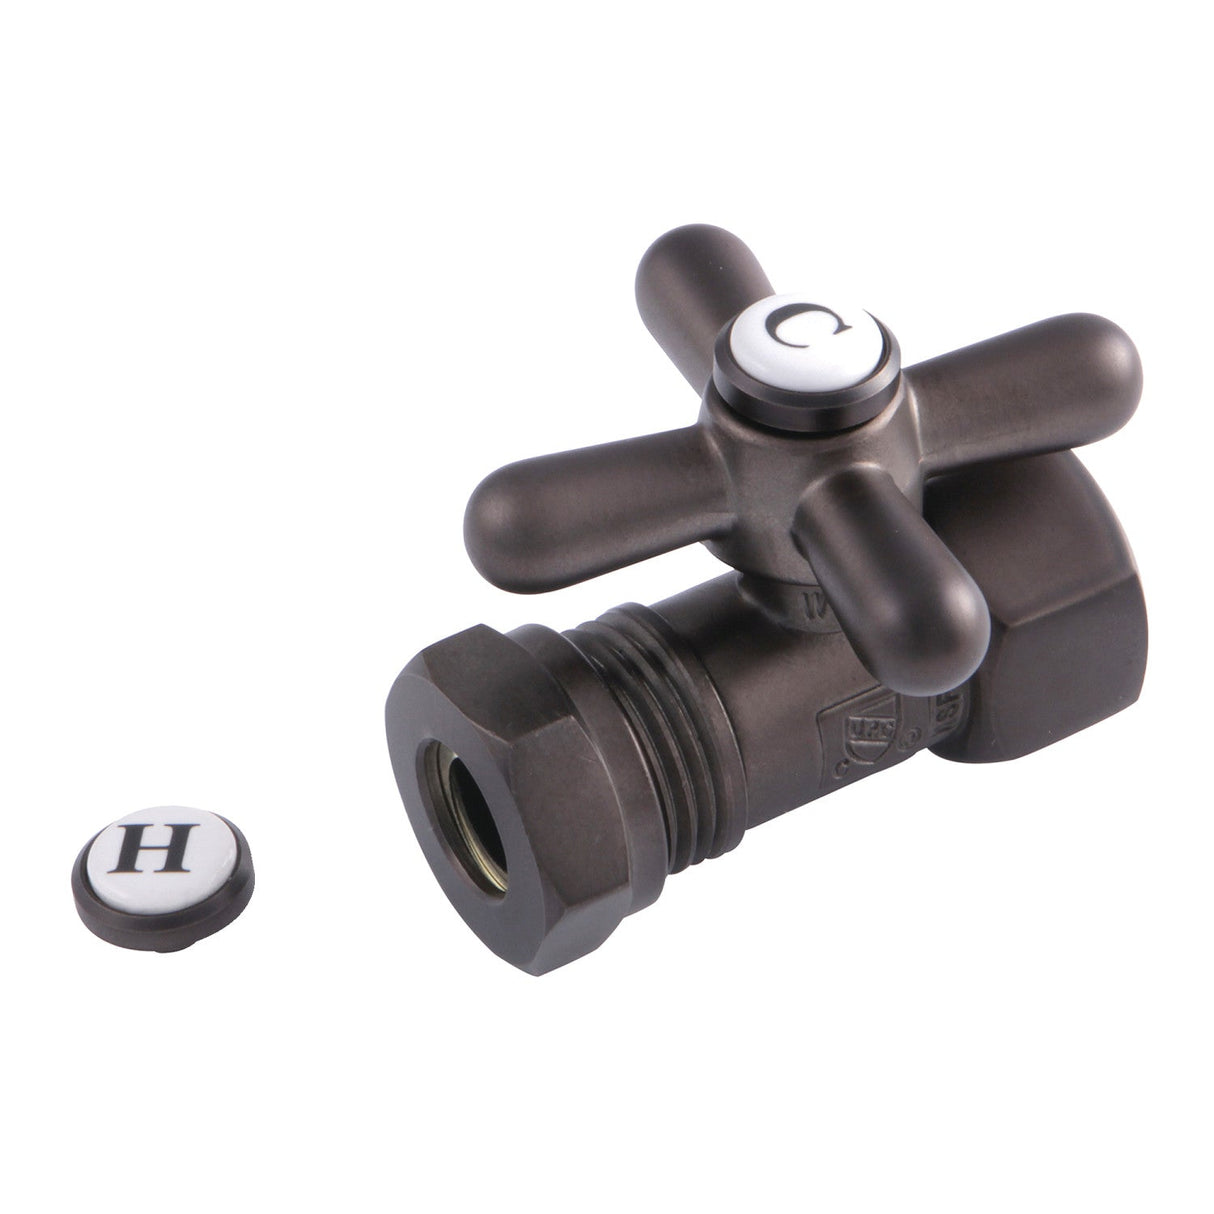 Vintage CC44155X 1/2-Inch FIP x 1/2 or 7/16-Inch Slip Joint Quarter-Turn Straight Stop Valve, Oil Rubbed Bronze